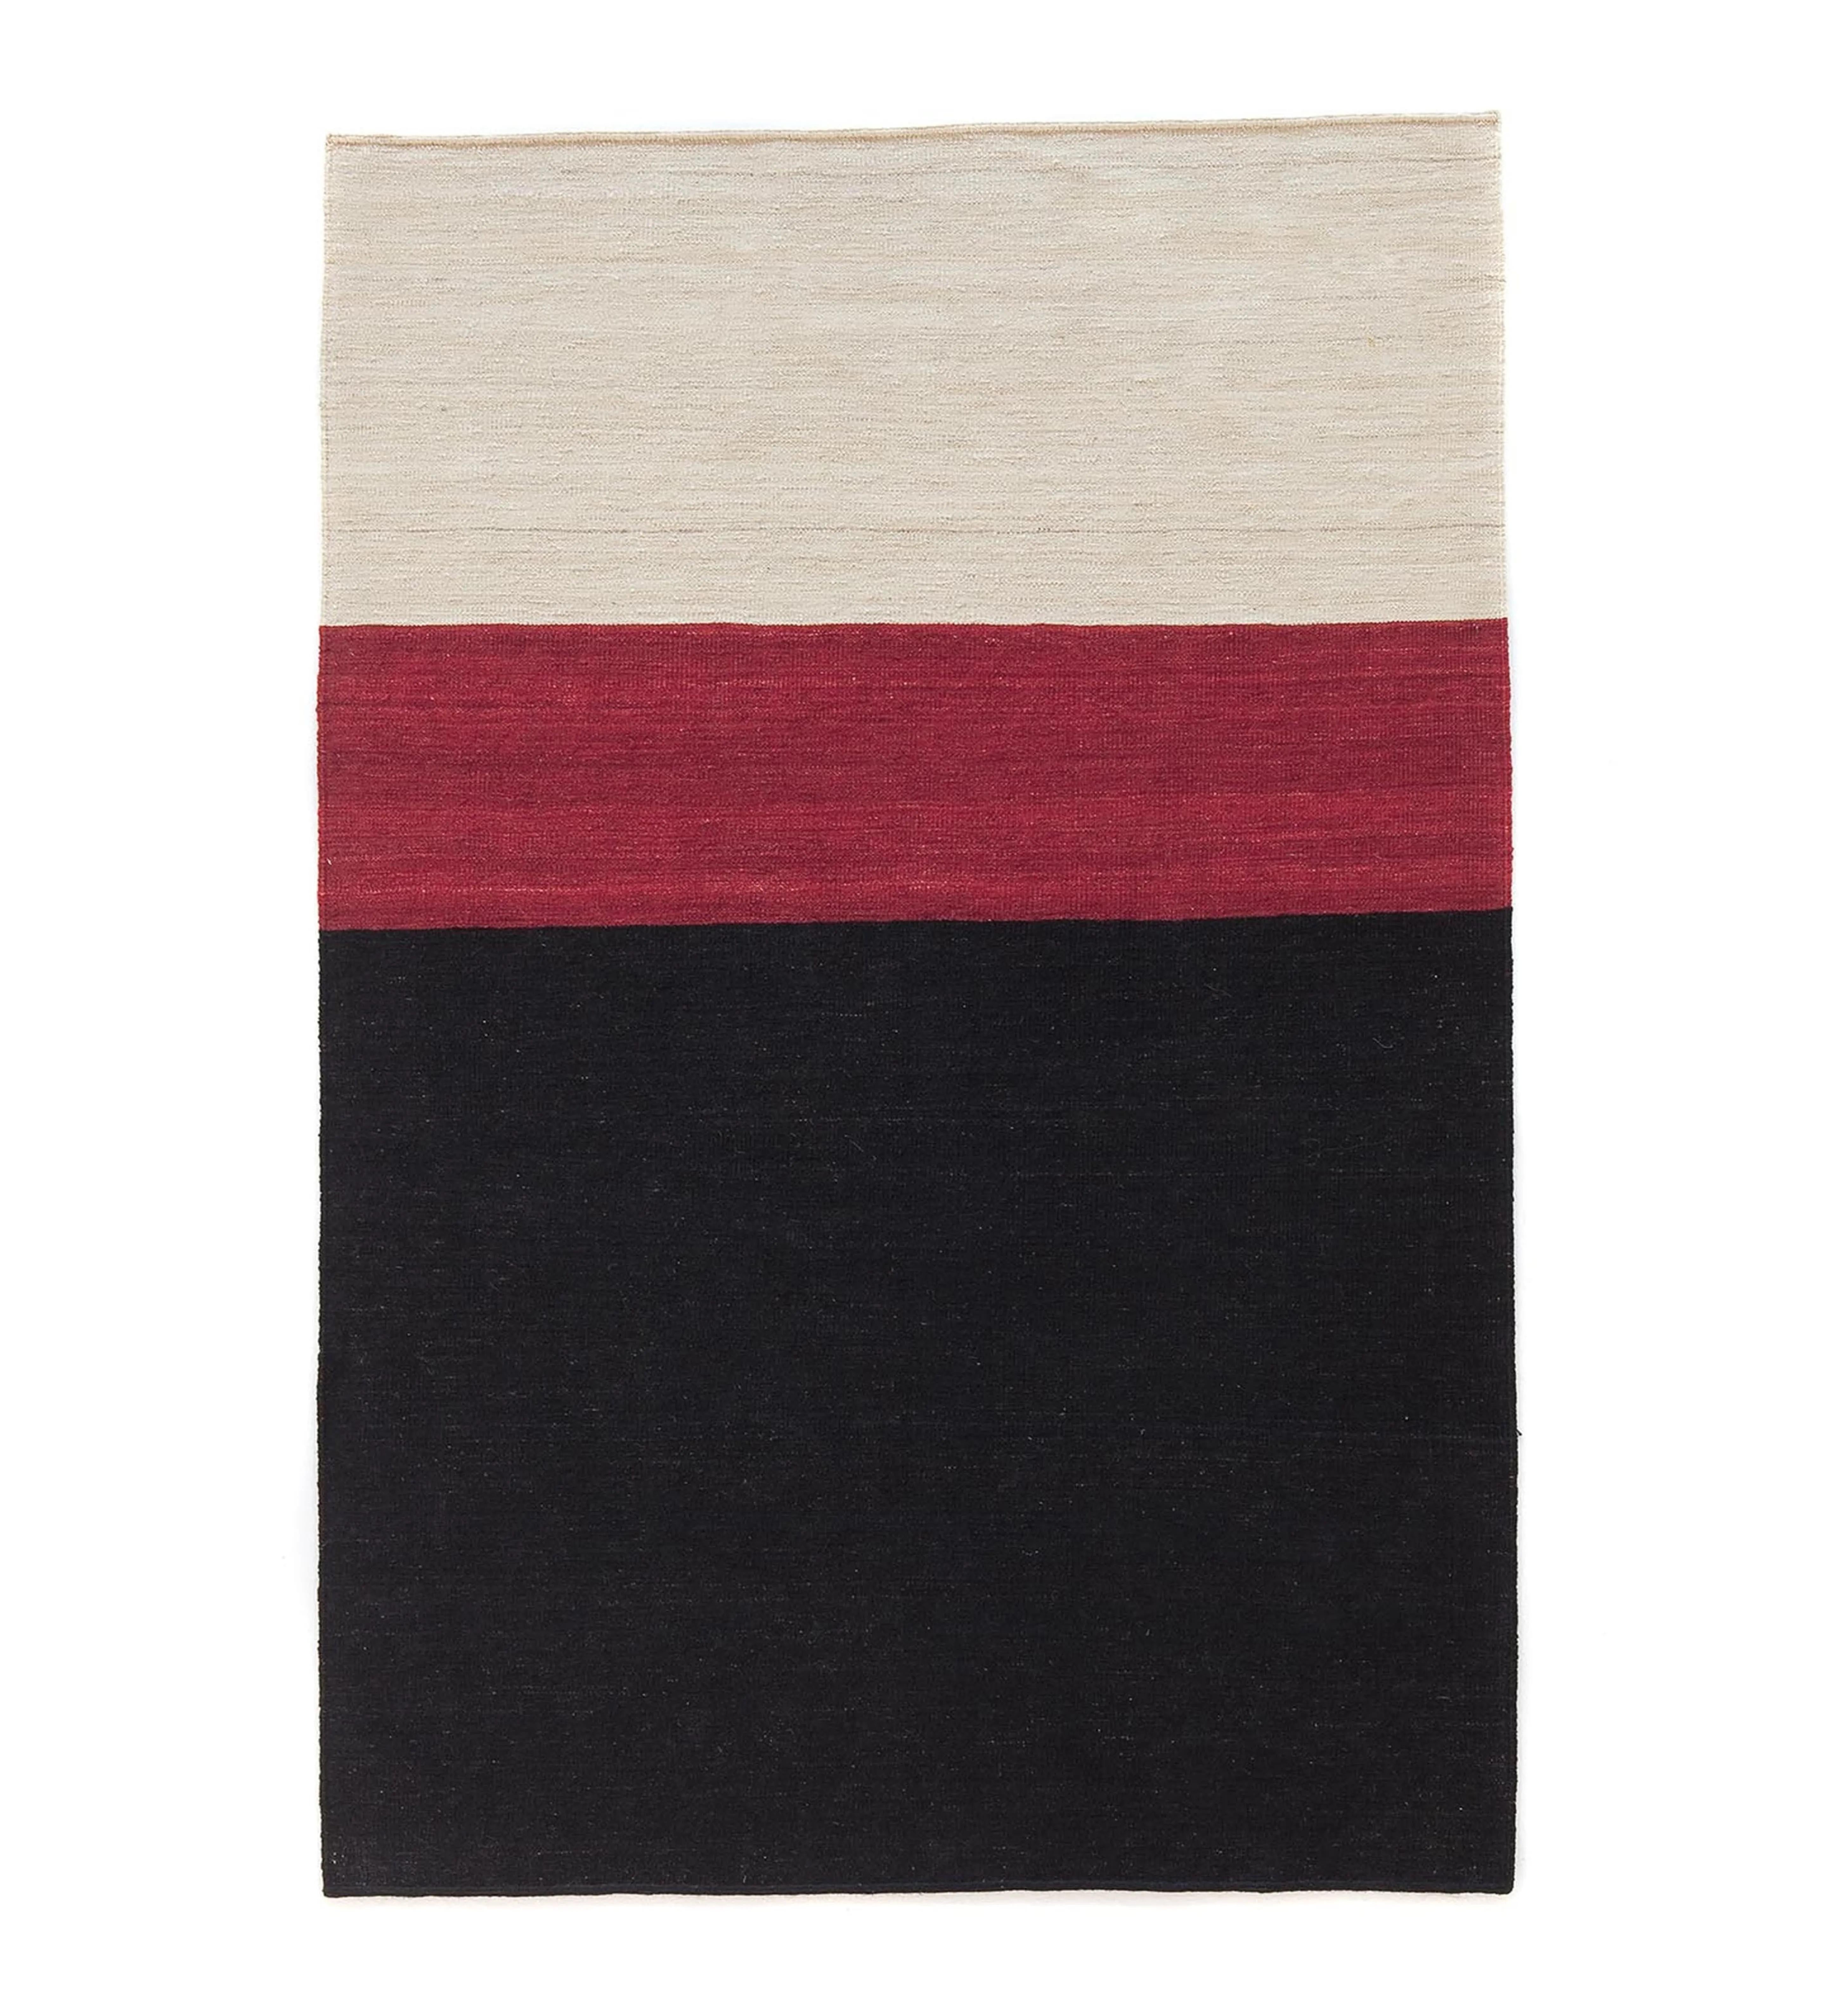 Large 'Mélange Color 1' Hand-Loomed Rug by Sybilla for Nanimarquina For Sale 1